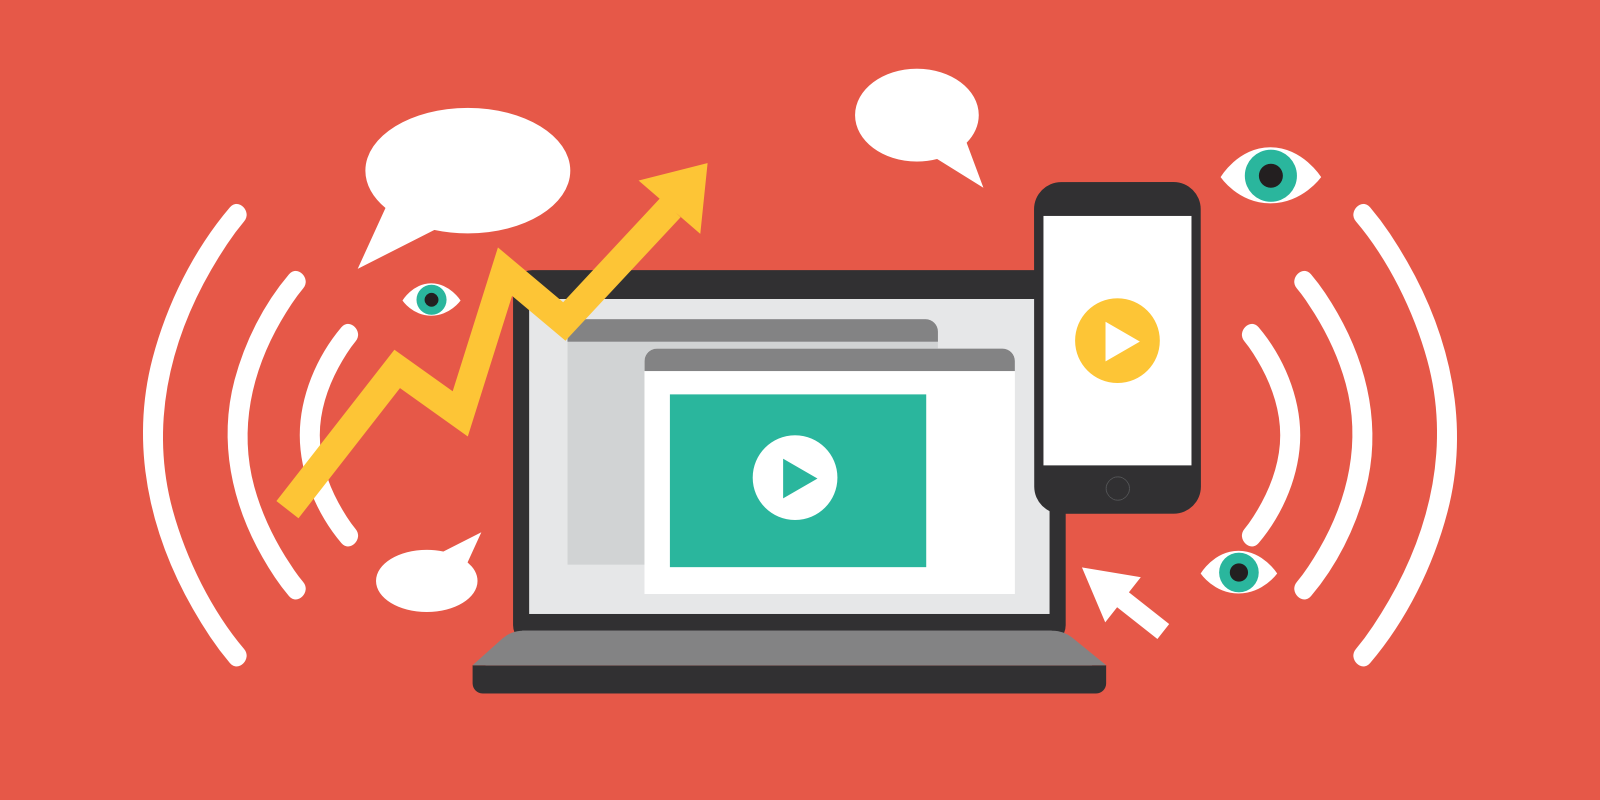 Video Marketing: Latest 2021 Guide (With New & Proven Strategies)